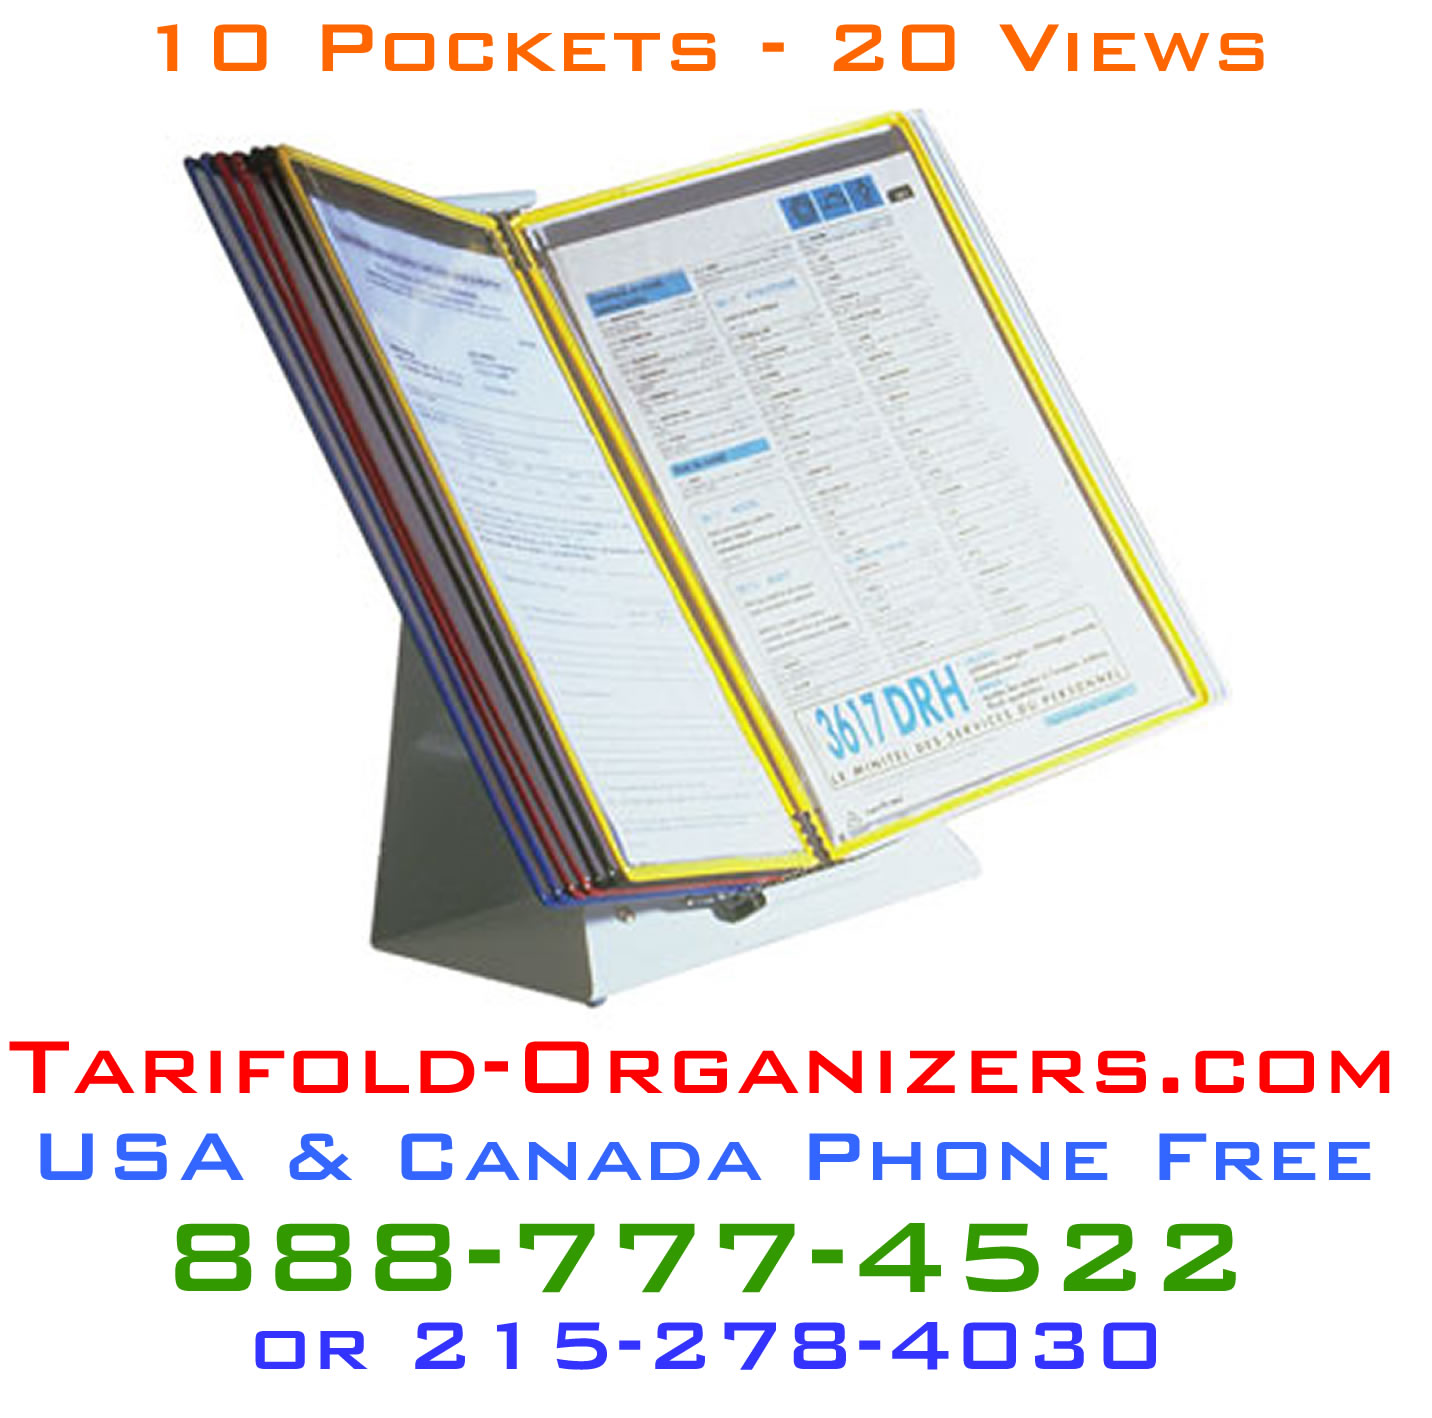 Tarifold Organizers - the number one family of desktop organizers in the USA today.